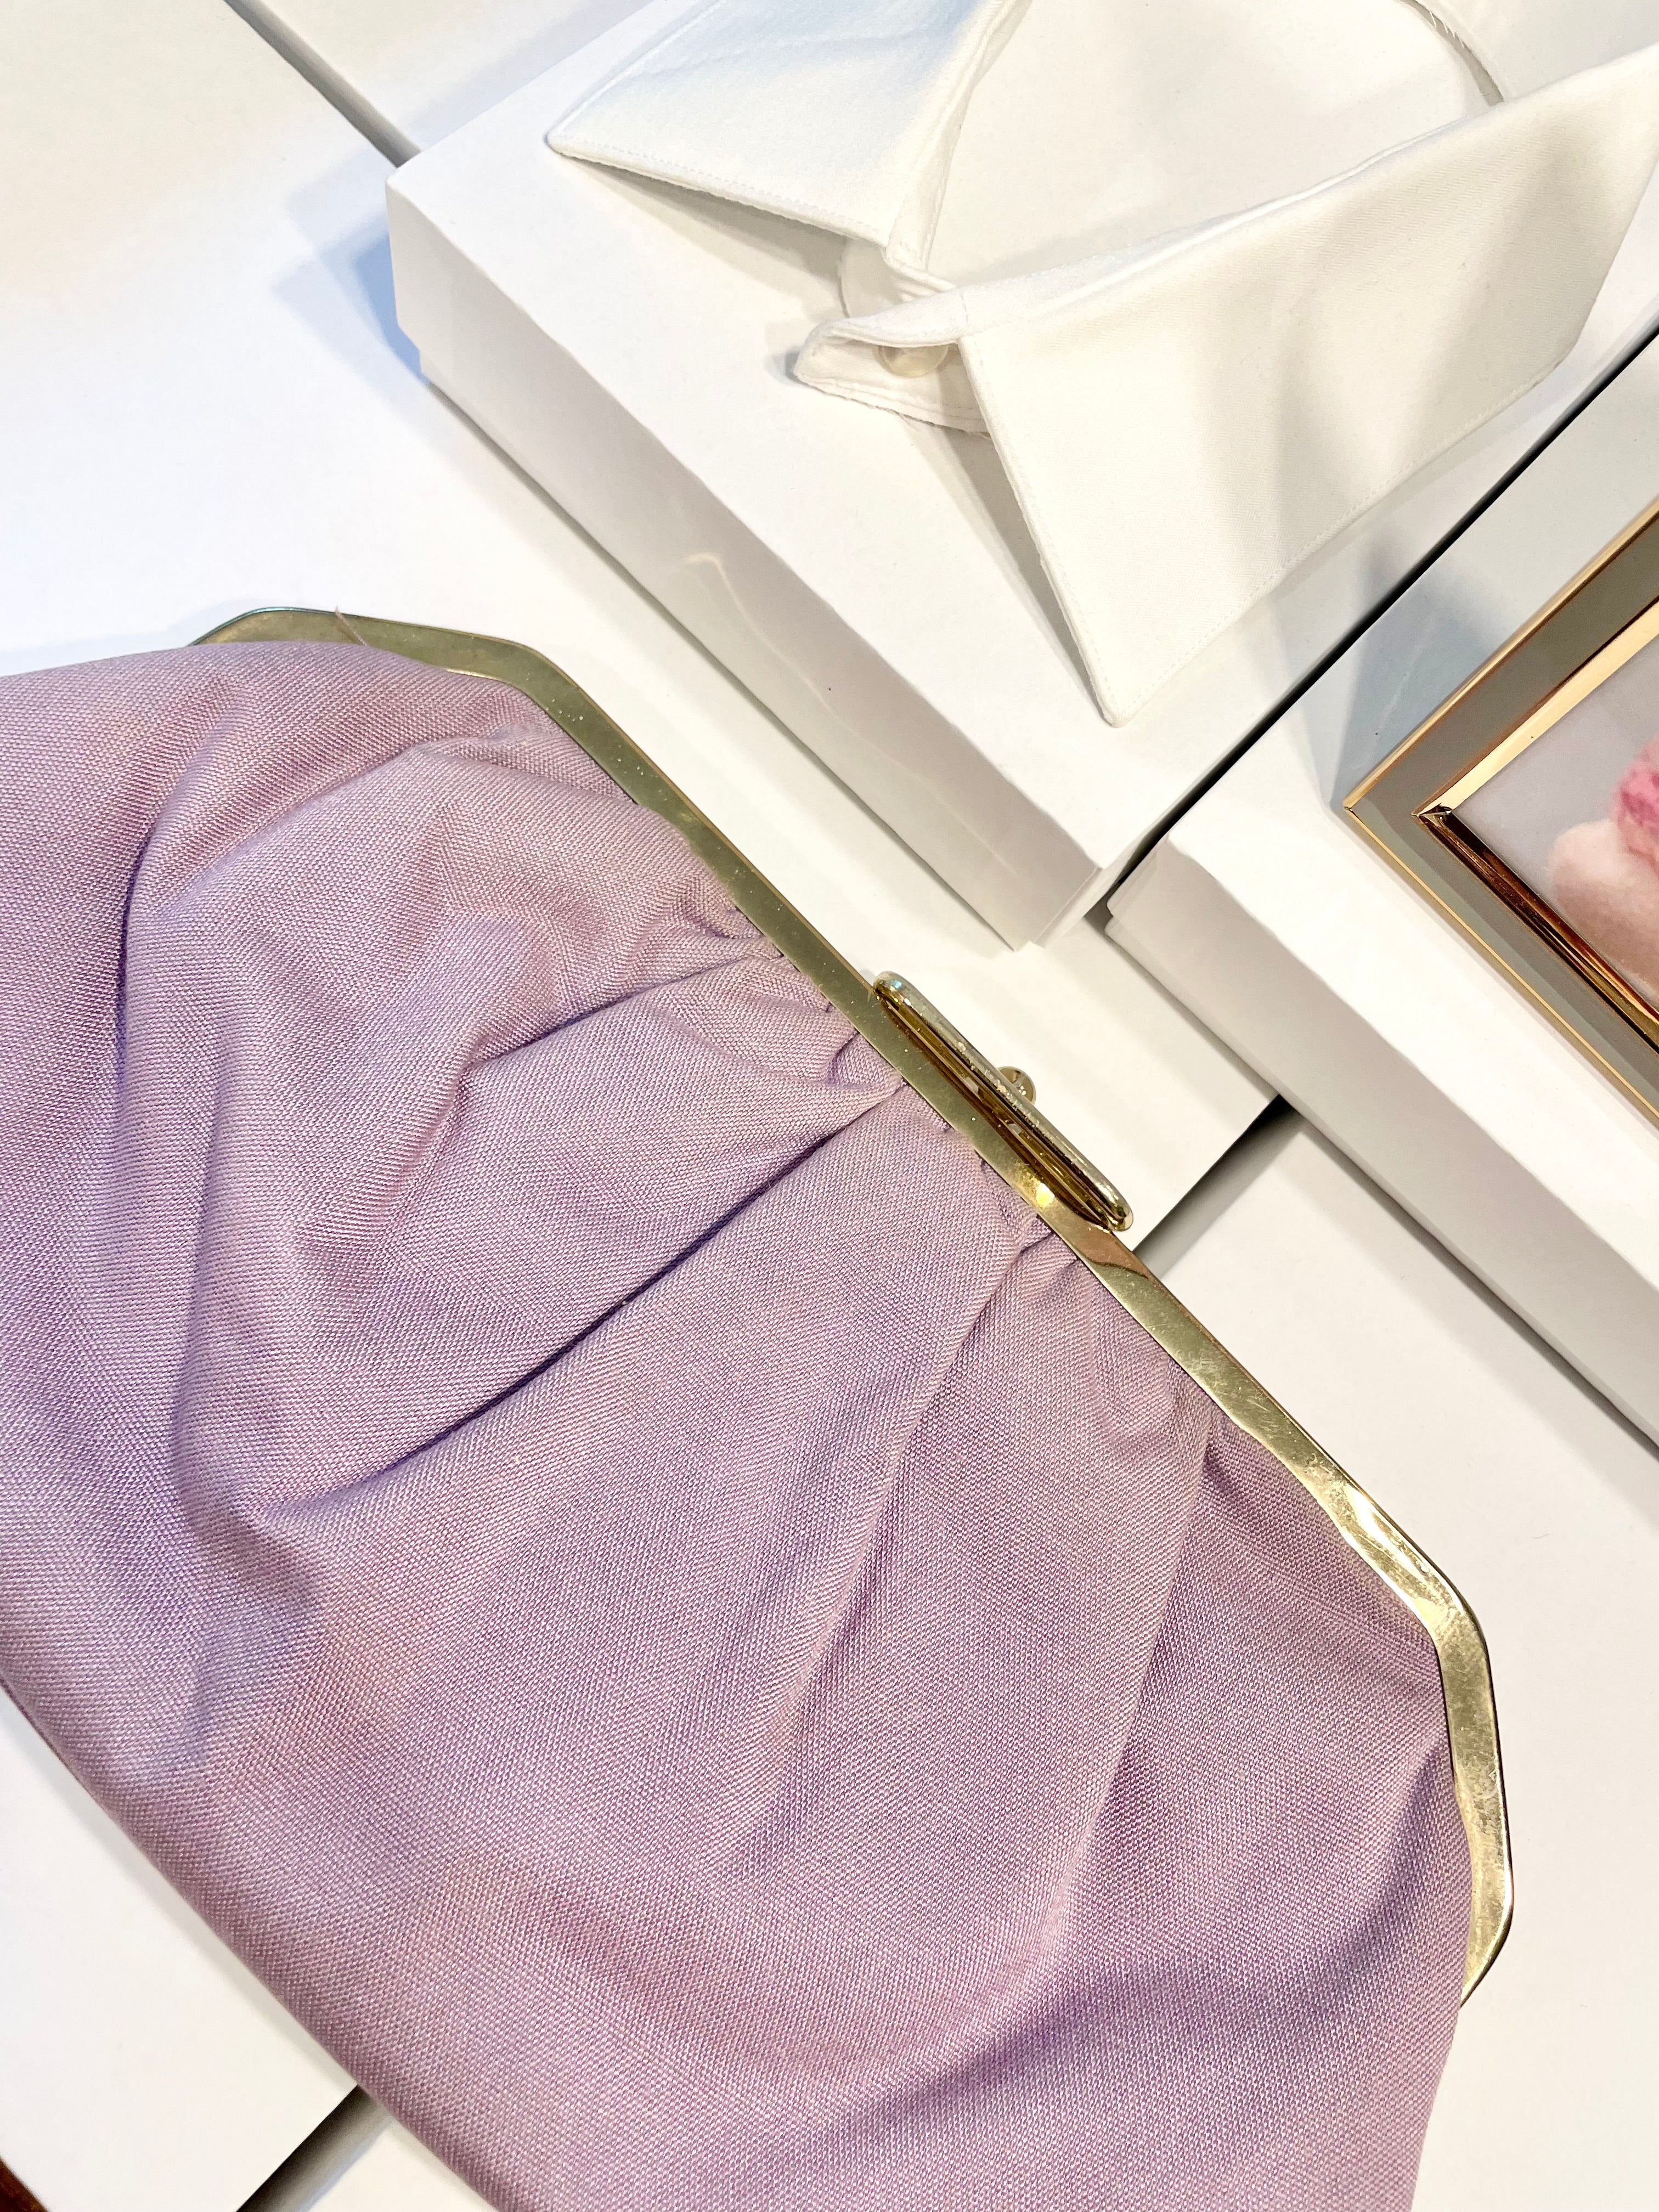 The Happy Hostess loves anything colorful! She does this feminine lilac linen colored clutch bag... so snazzy!